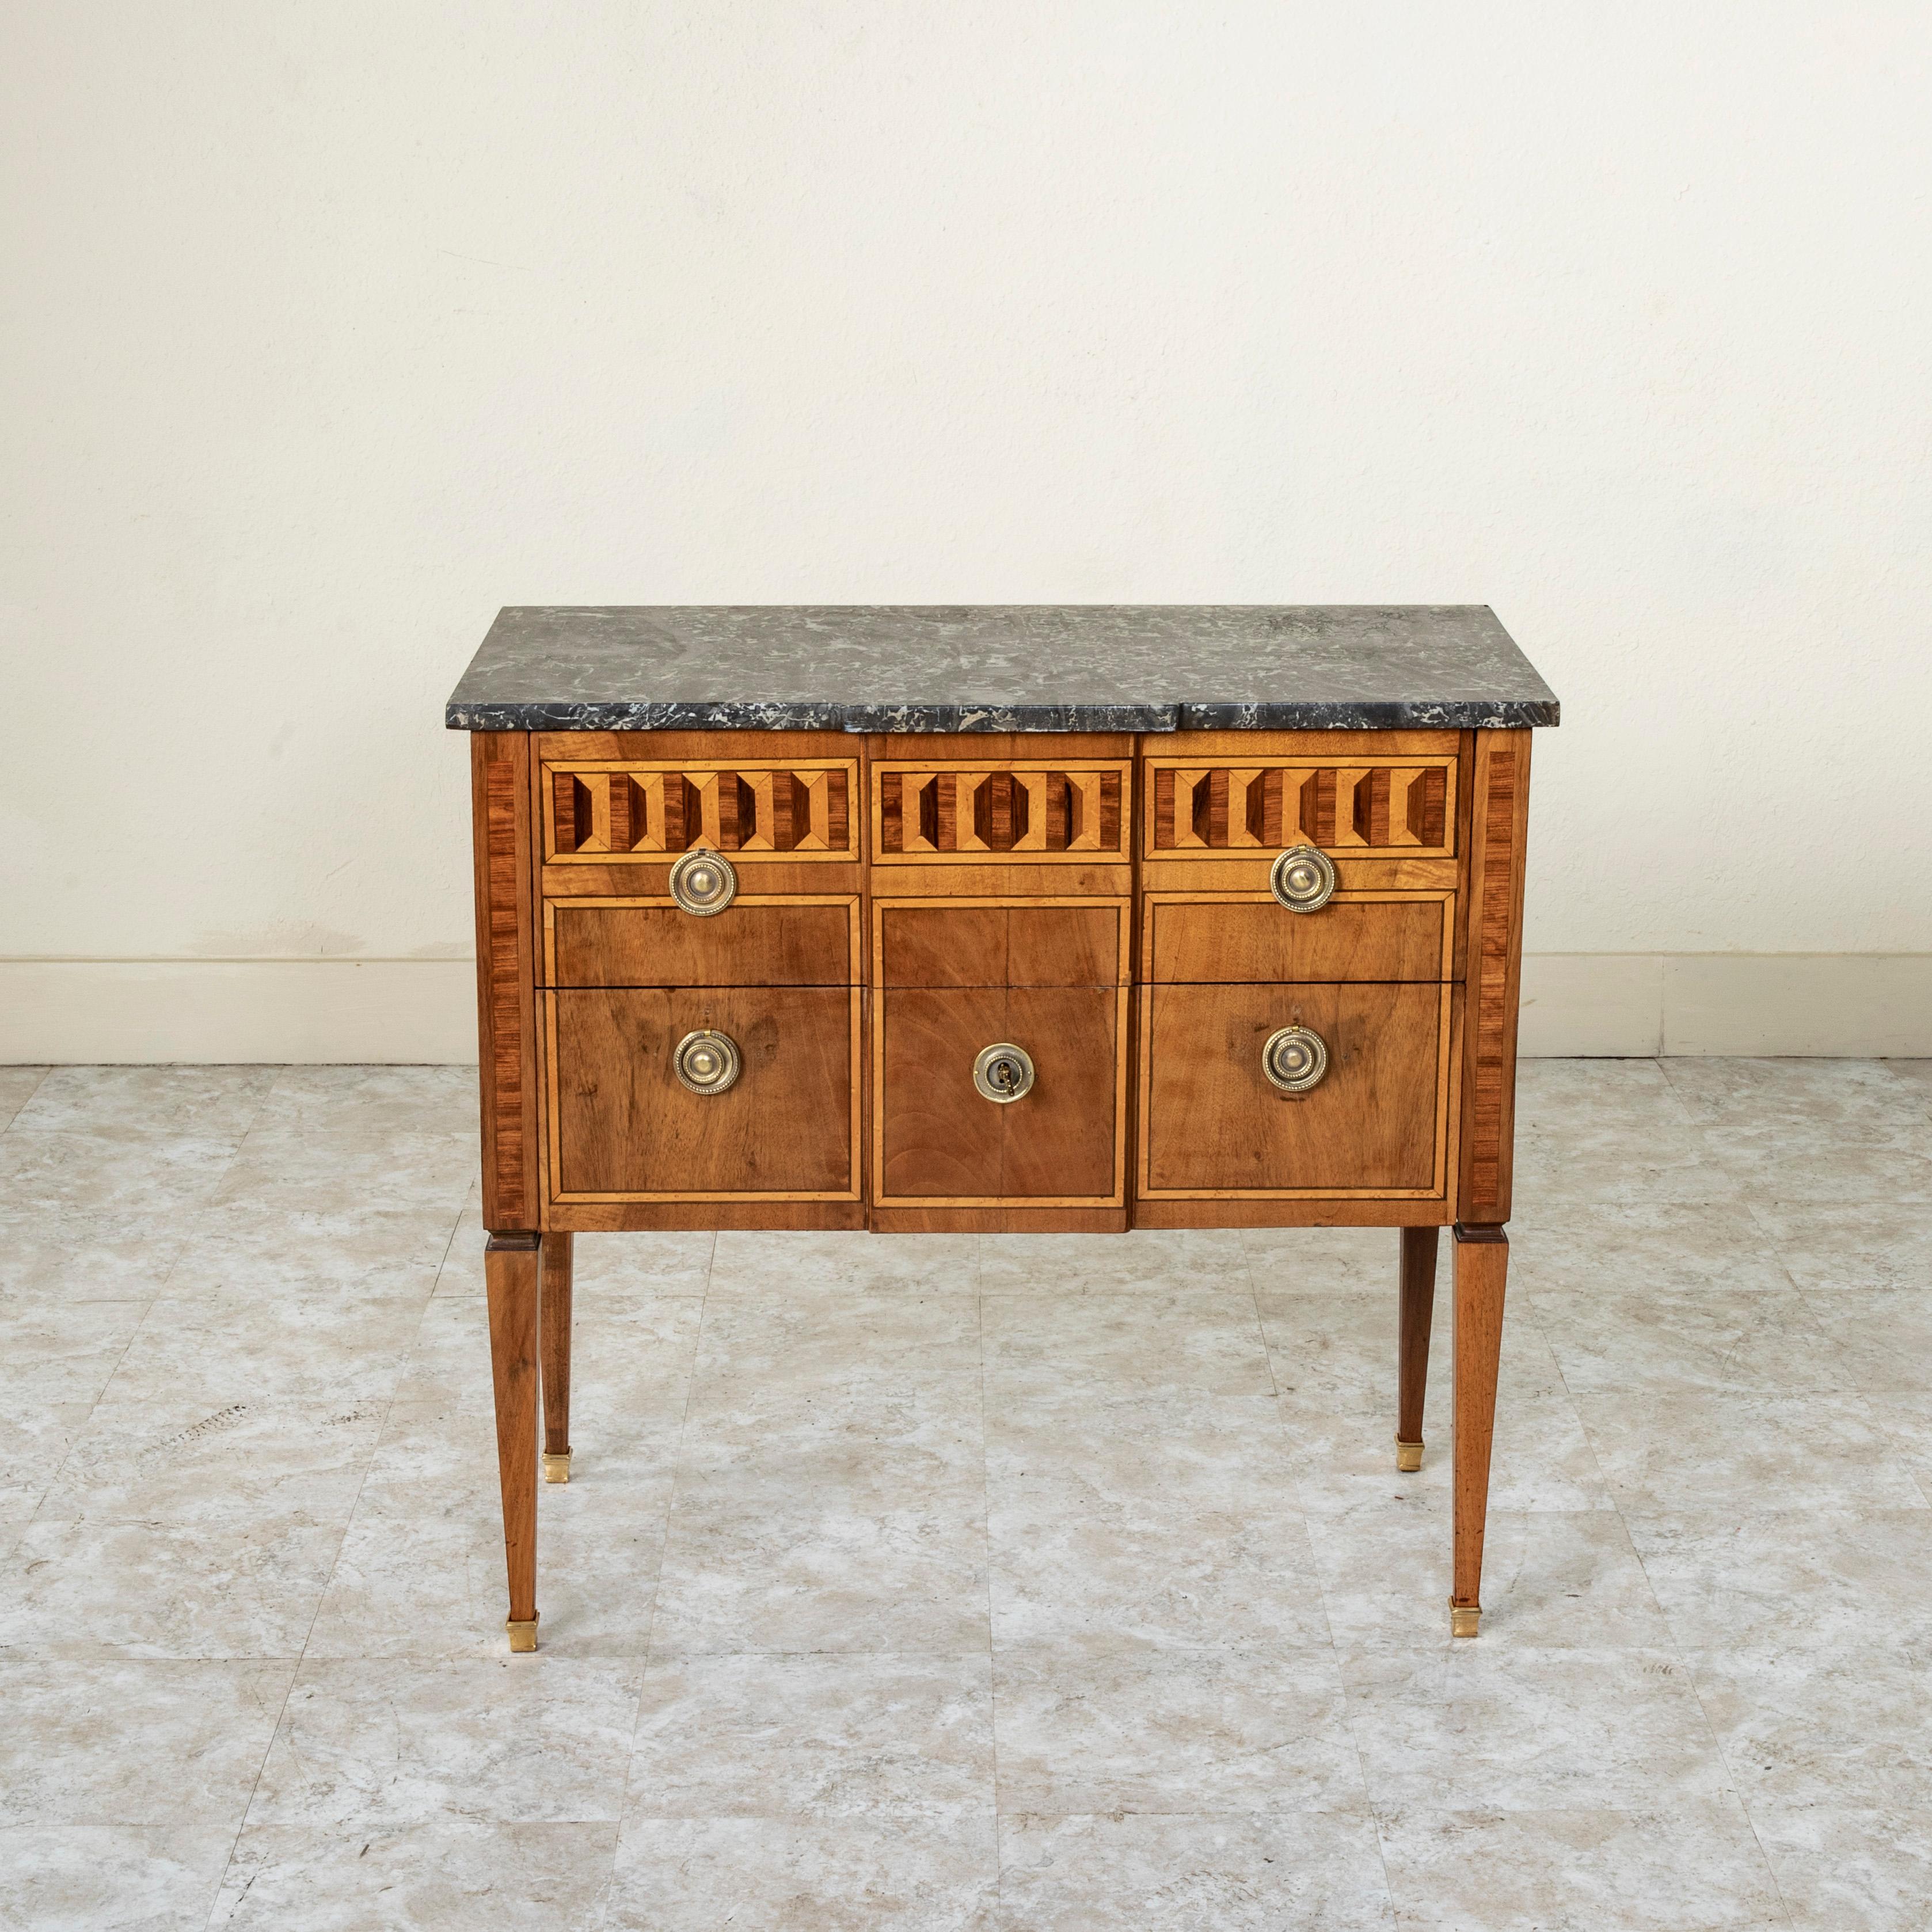 Found in the region of Normandy, France, this rare smaller scale late eighteenth century Louis XVI period sauteuse chest features a geometric marquetry facade of rosewood, lemon wood, sycamore and palisander on three sides, and is crowned with a